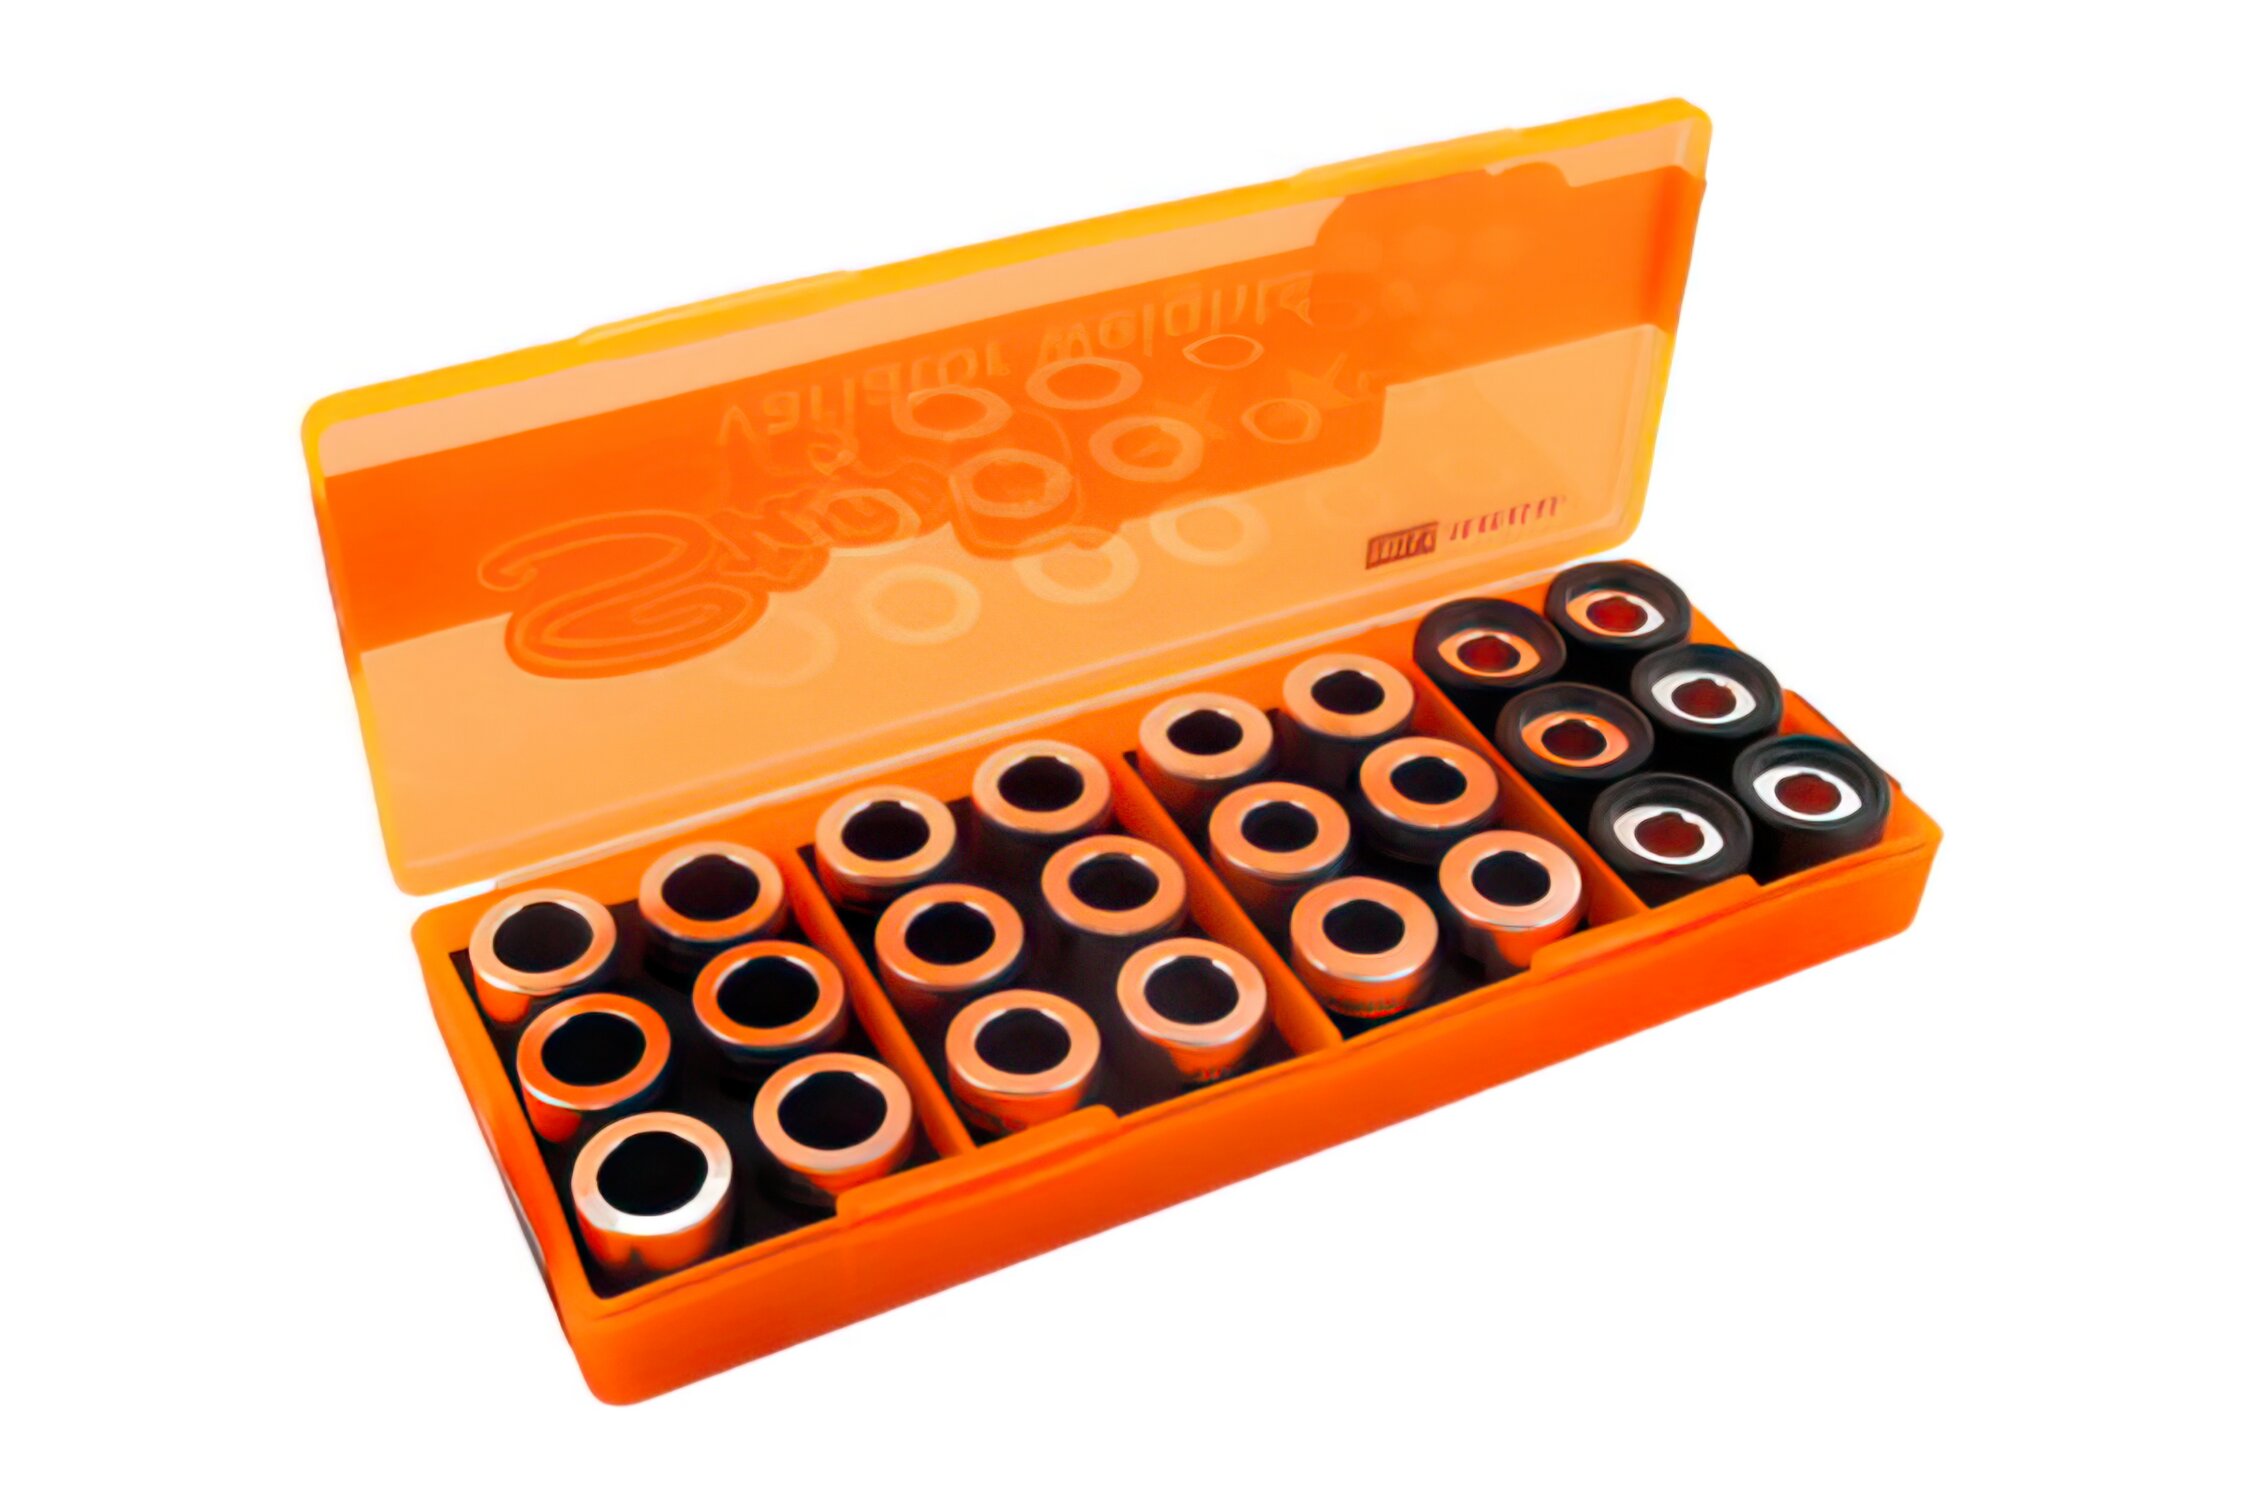 SSP-G ROLLER WEIGHT TUNING KIT (16x13) *3gm - 14gm* FOR 50cc - 100cc QMB139  GY6 - gy6racing